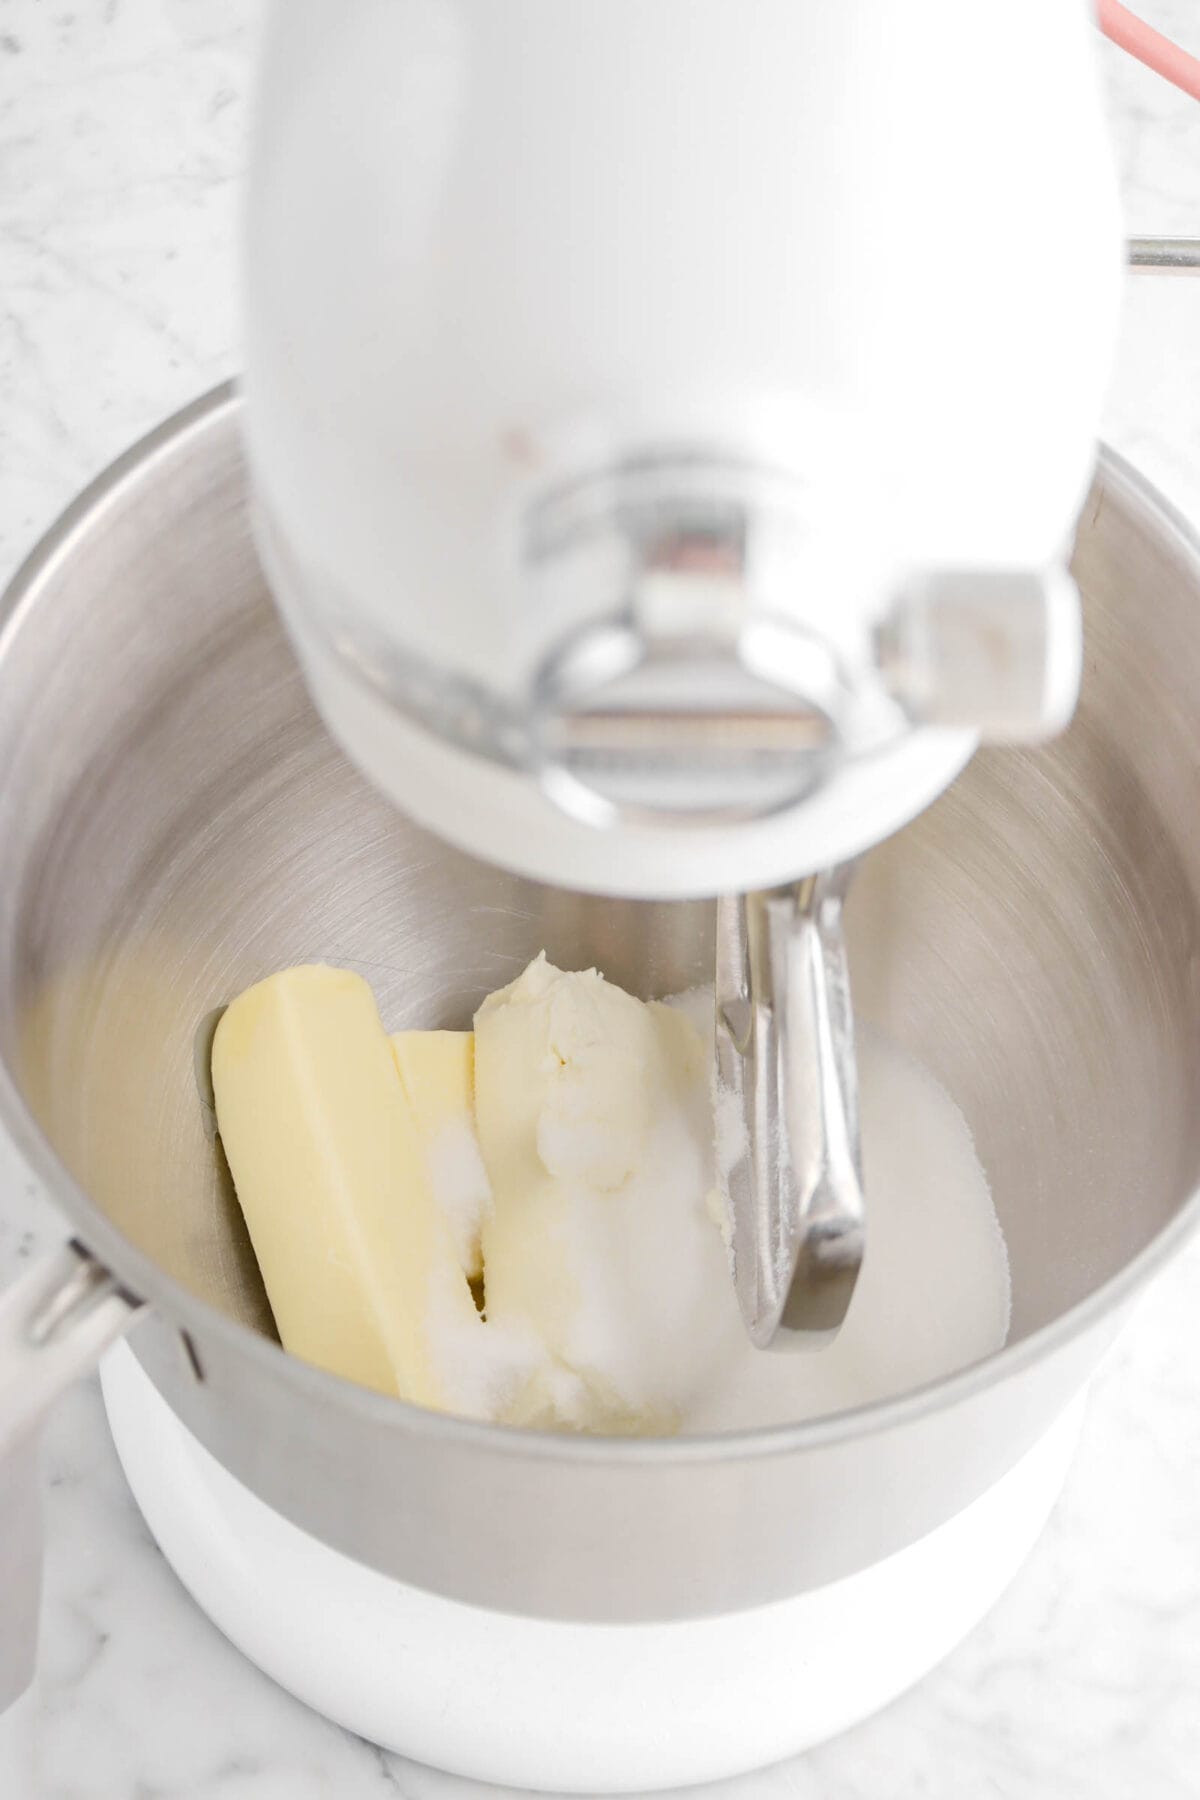 butter, cream cheese, and sugar in mixer